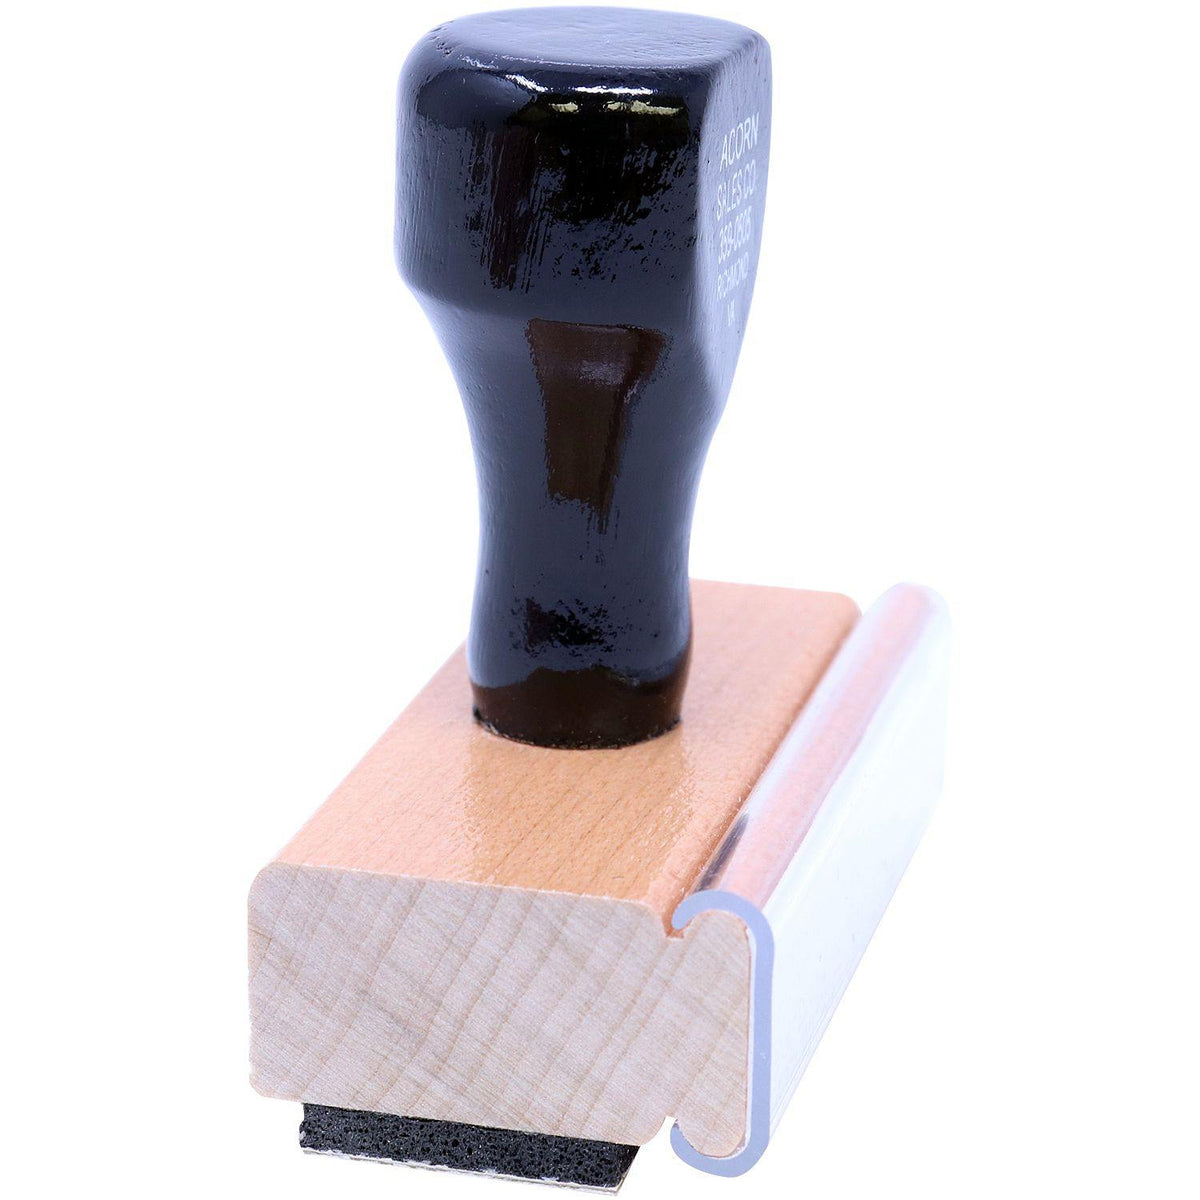 Side View of Large Home Equity Rubber Stamp at an Angle